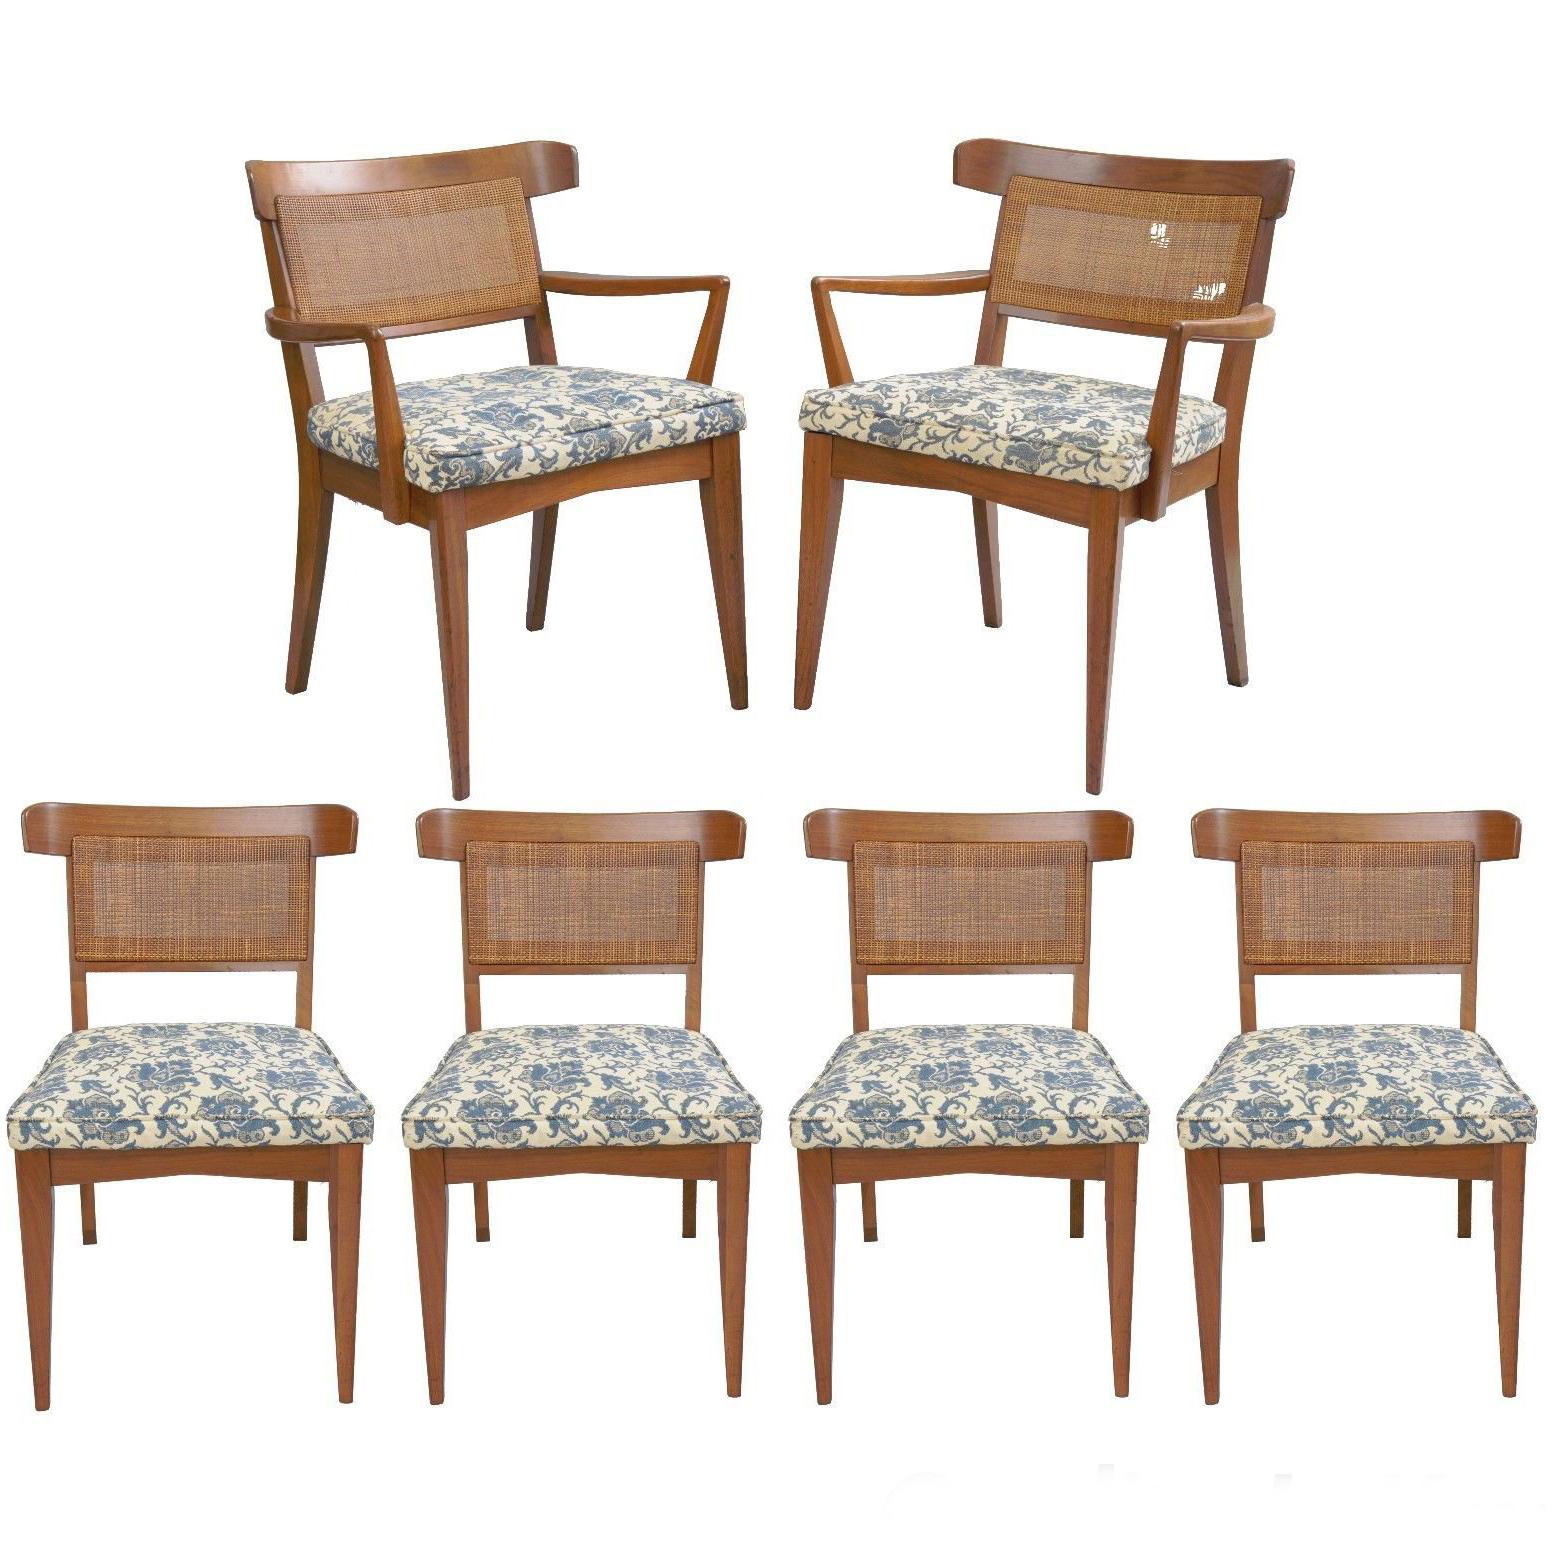 Six Mid-Century Modern Walnut Curved Cane Back Dining Chairs Tomlinson Style